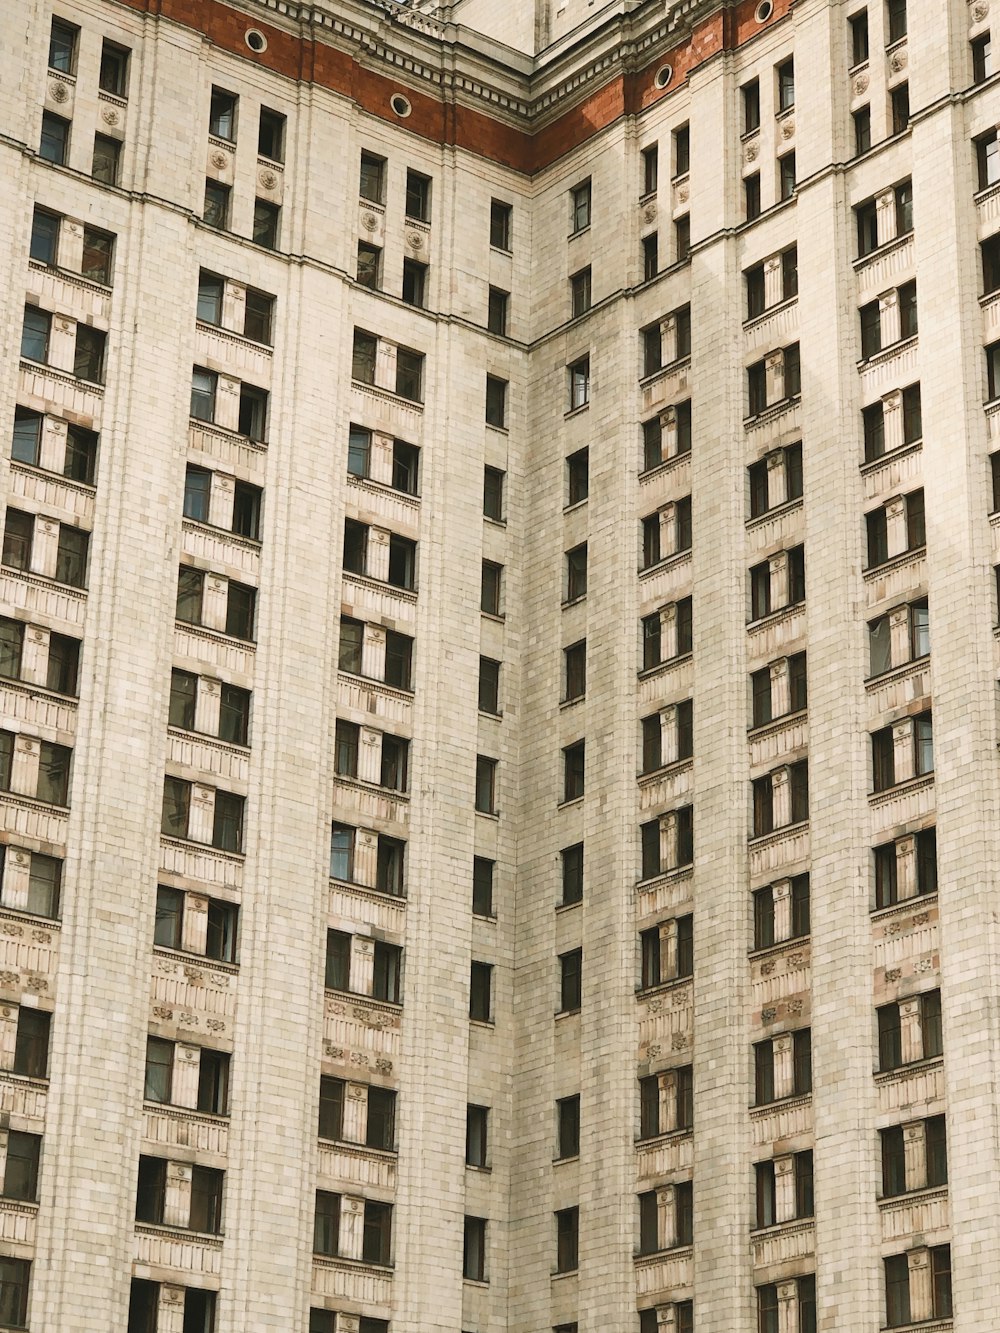 a tall building with many windows